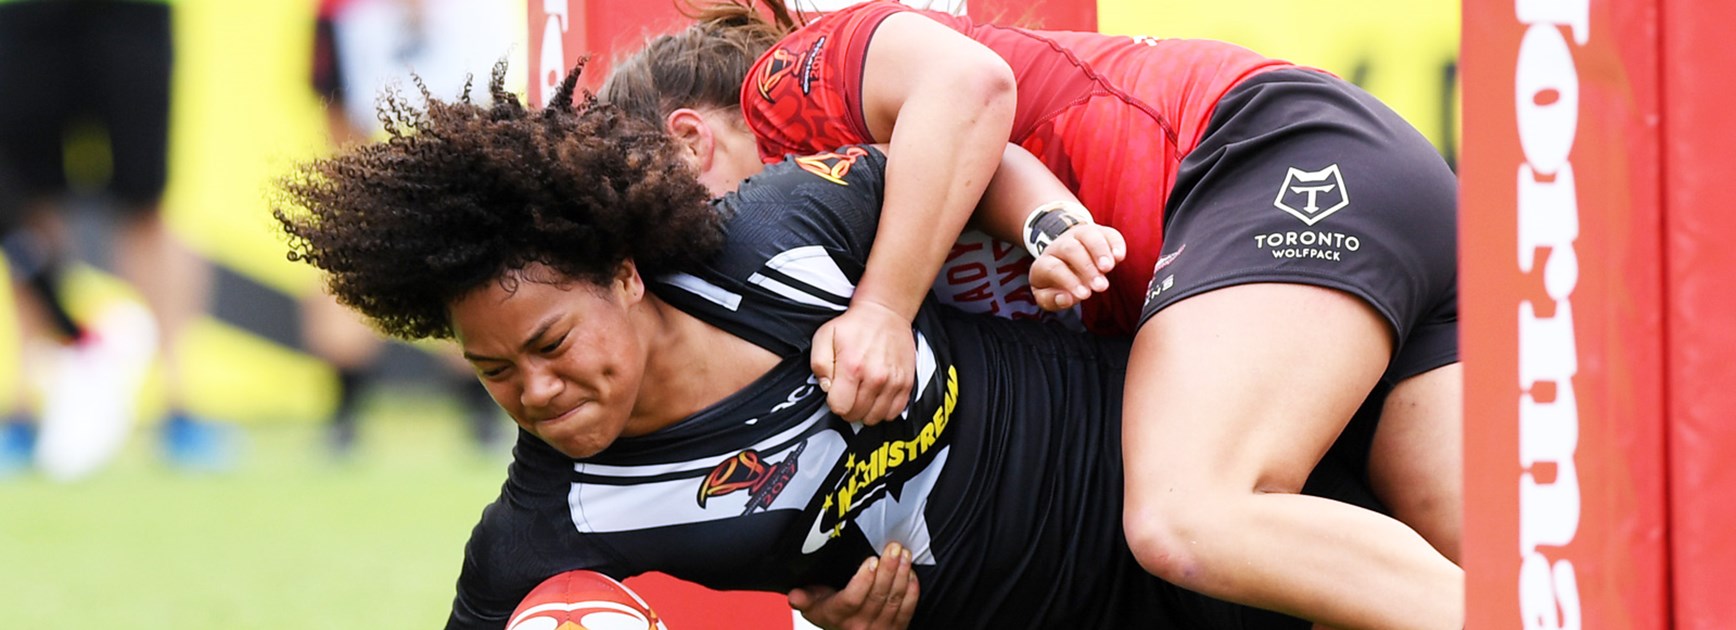 Teuila Fotu-Moala has been named the women's rugby league player of the year.